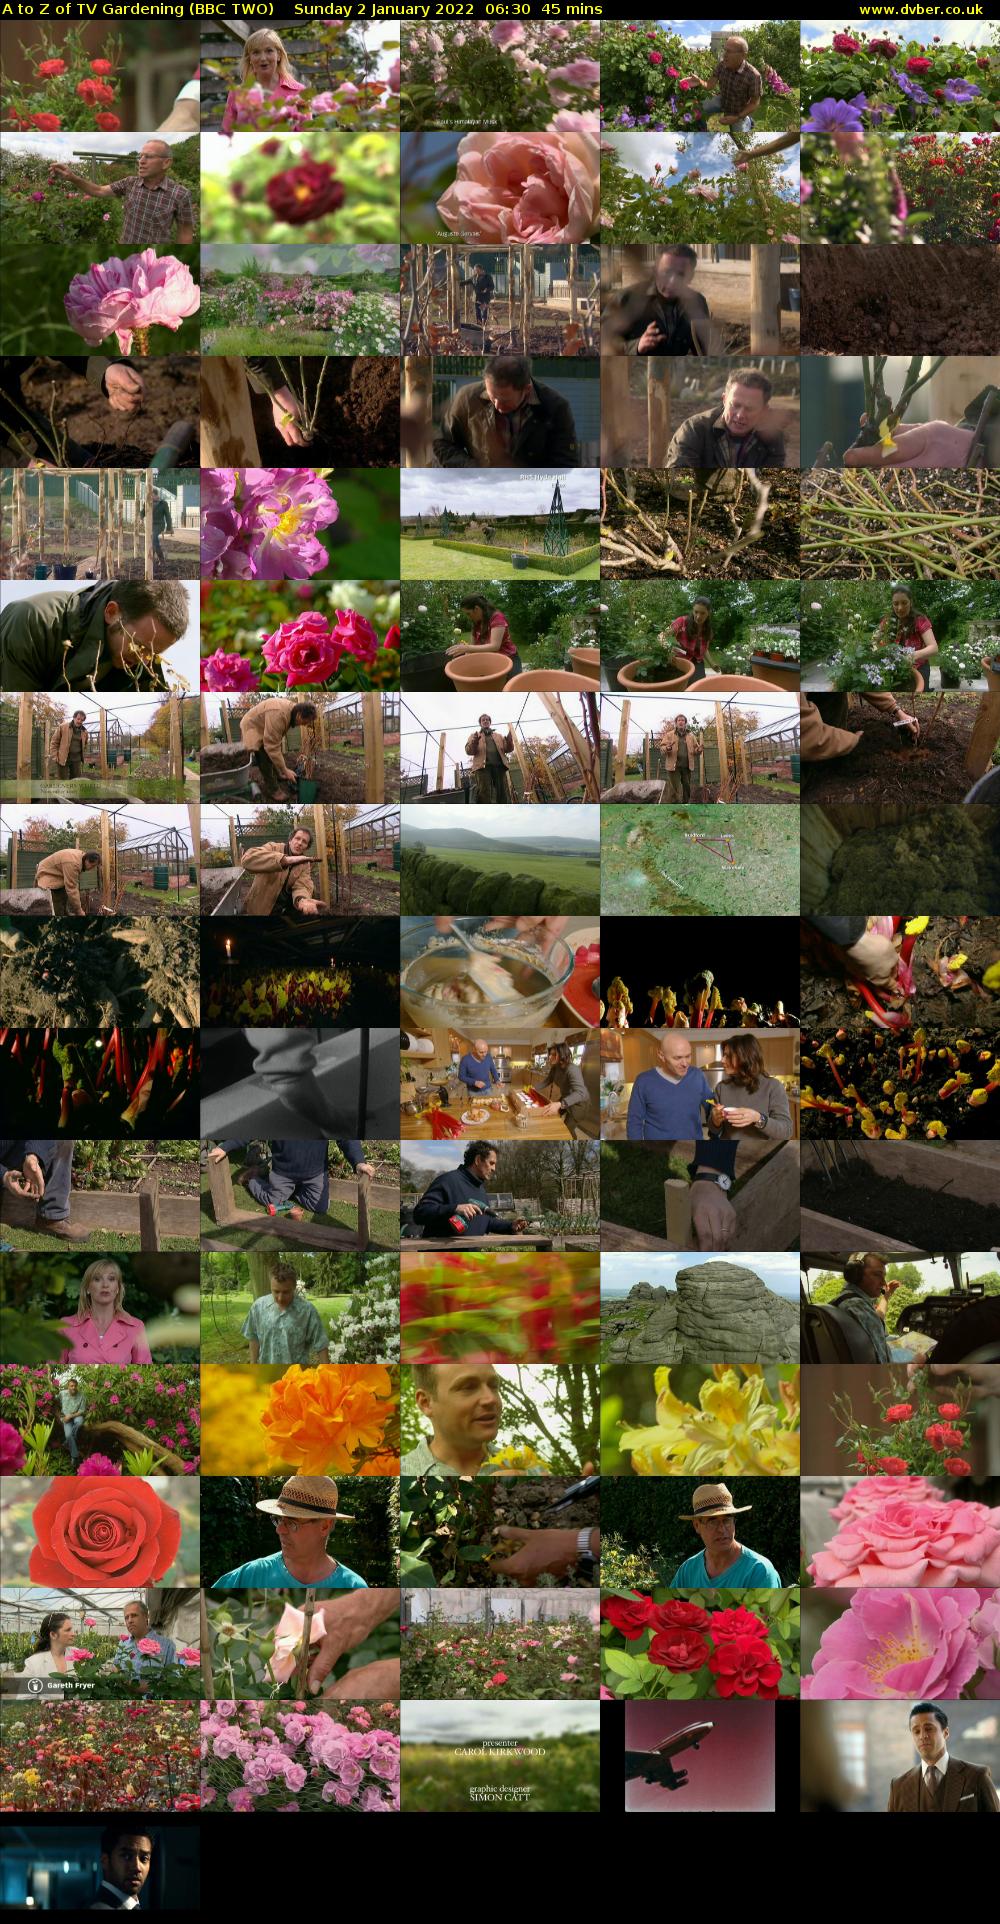 A to Z of TV Gardening (BBC TWO) Sunday 2 January 2022 06:30 - 07:15